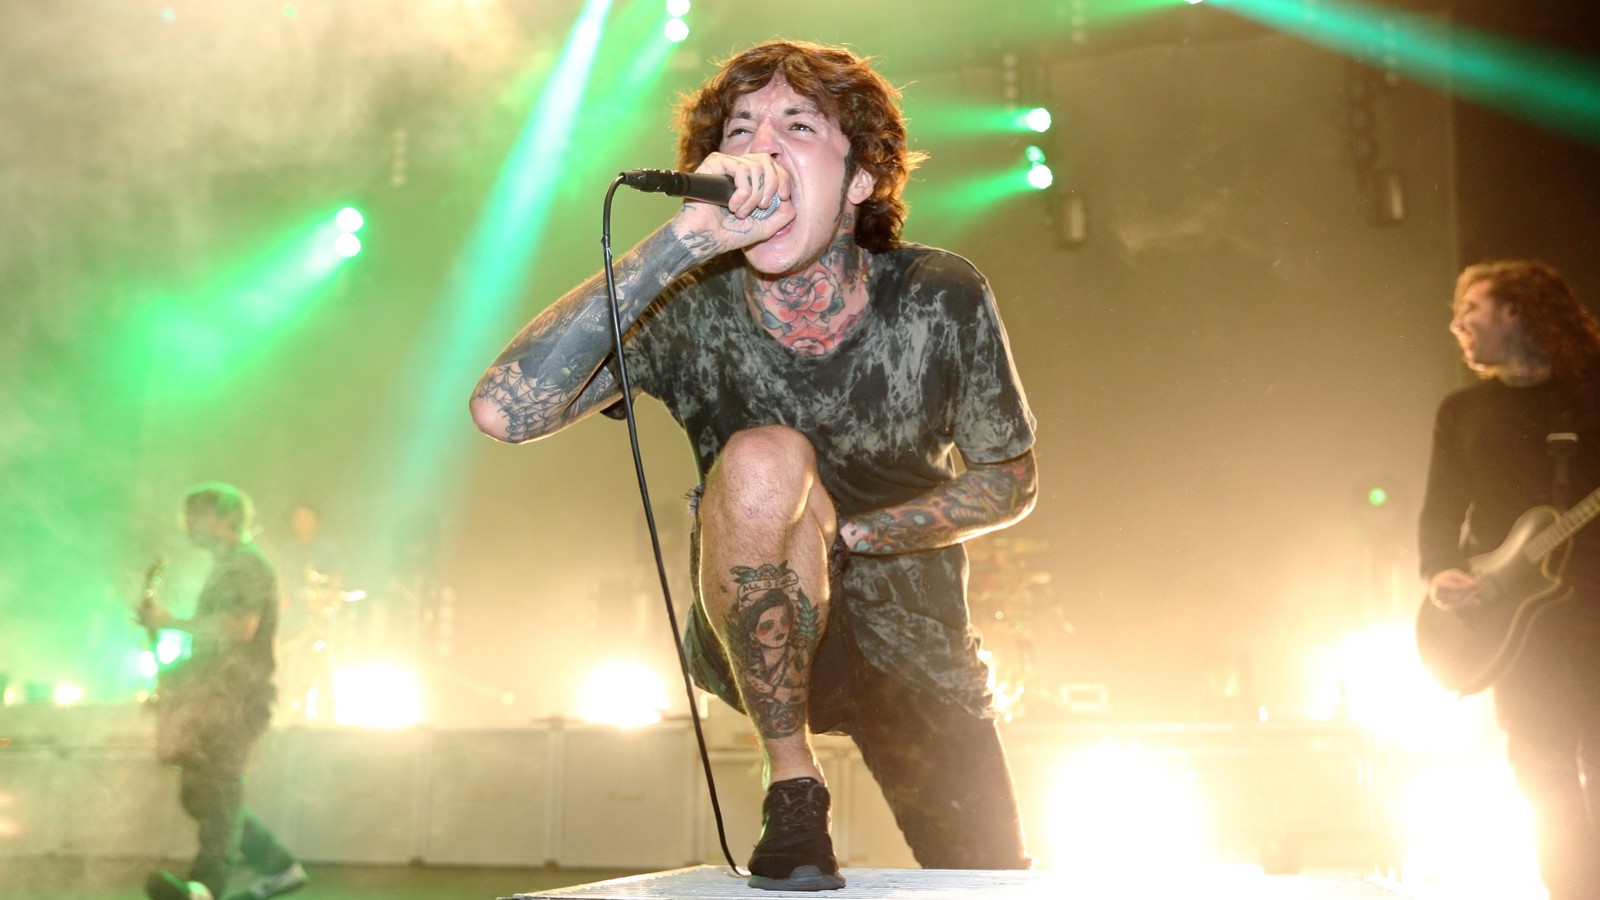 Bring Me the Horizon Albums Ranked From Worst to Best